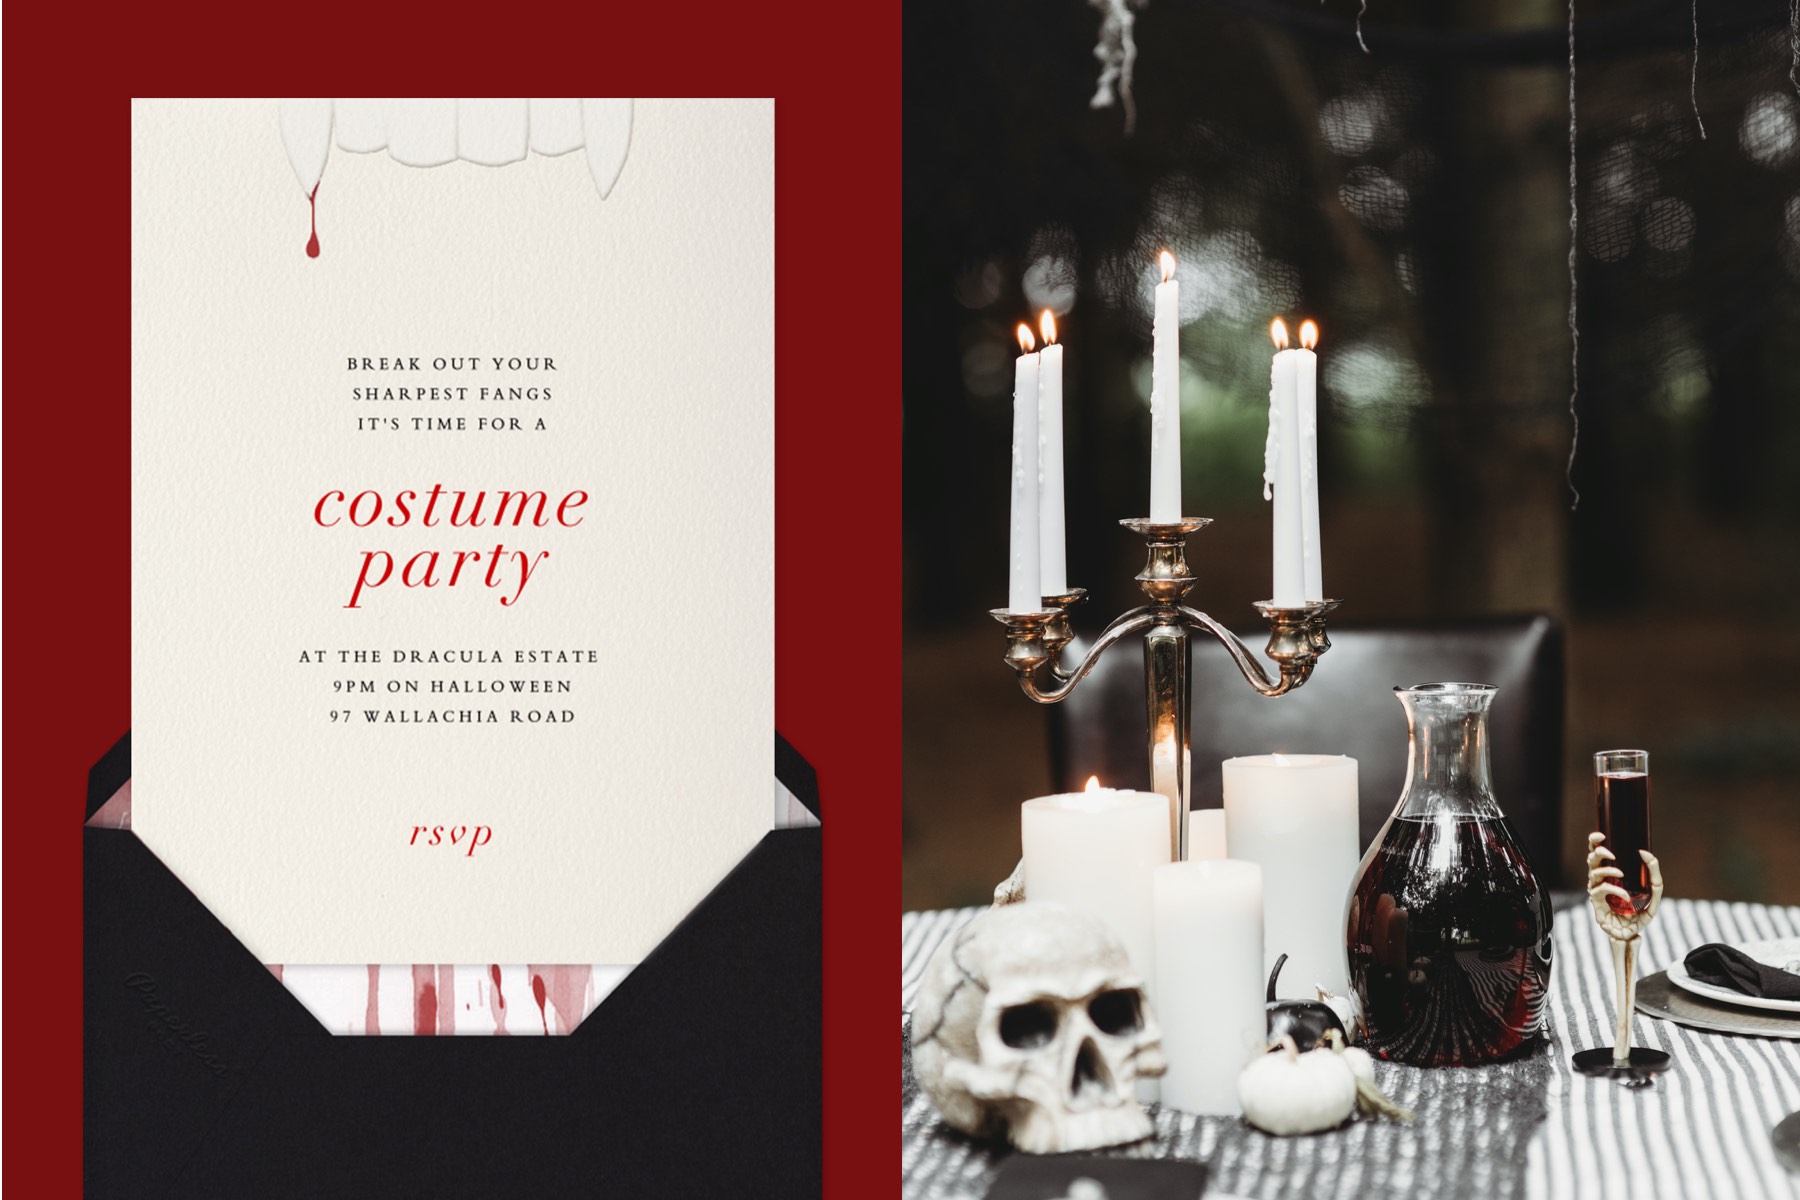 Left" "Nosferatu" by Paperless Post. Right: A macabre table scene with candles and a skull.